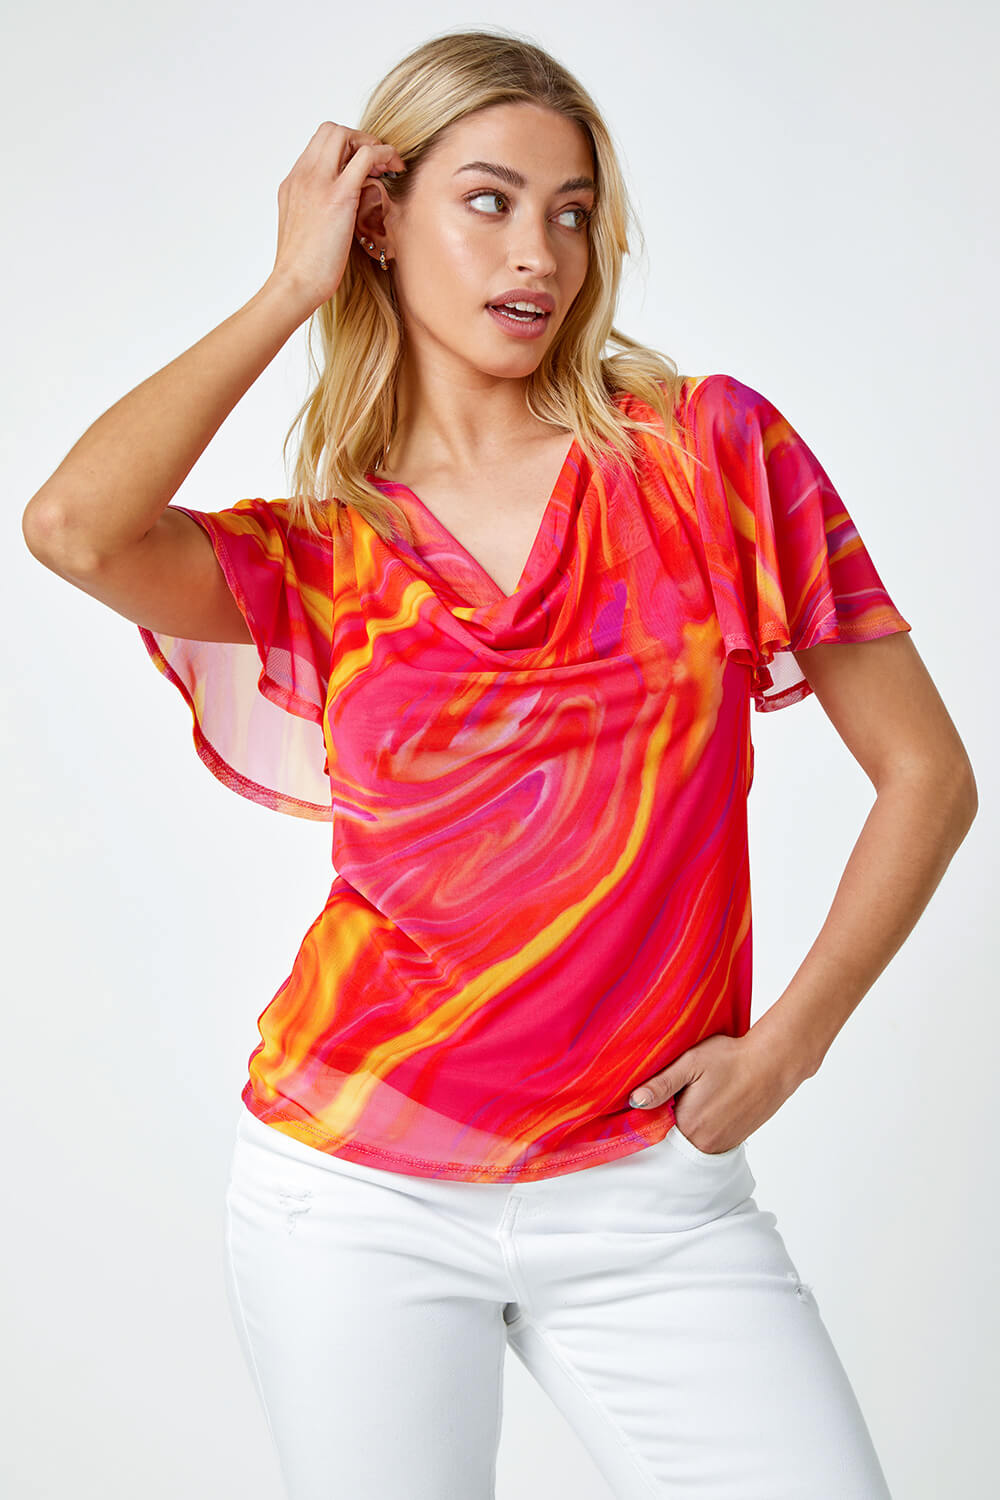 PINK Swirl Print Stretch Cut Out Top, Image 4 of 5